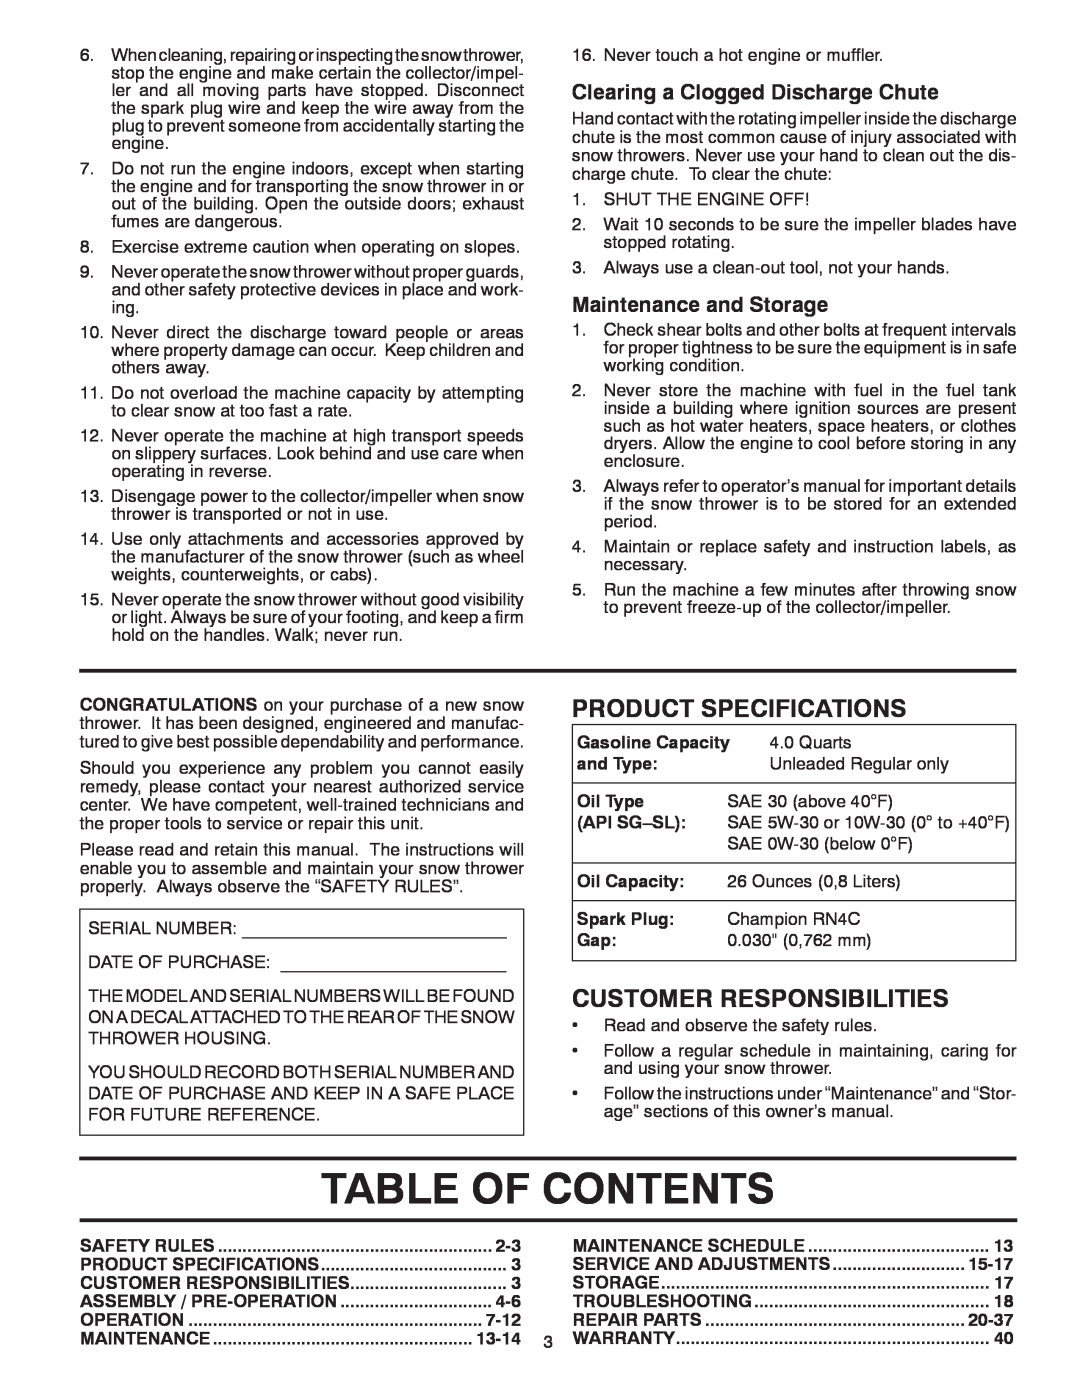 Poulan 424714 Table Of Contents, Product Specifications, Customer Responsibilities, Clearing a Clogged Discharge Chute 